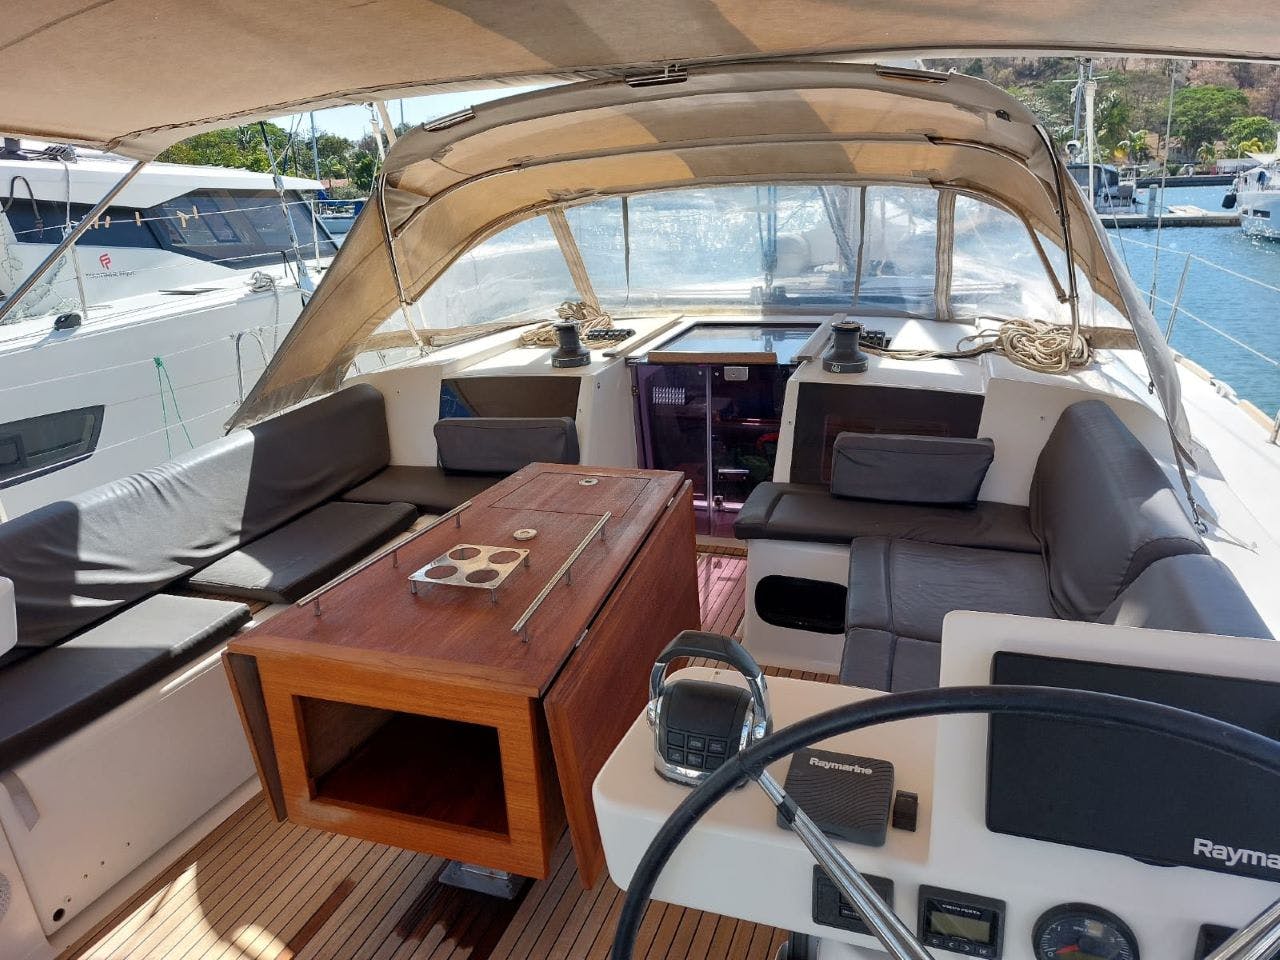 Book Dufour 520 GL Sailing yacht for bareboat charter in Corsica, Ajaccio, Port Tino Rossi, Corsica, France with TripYacht!, picture 3